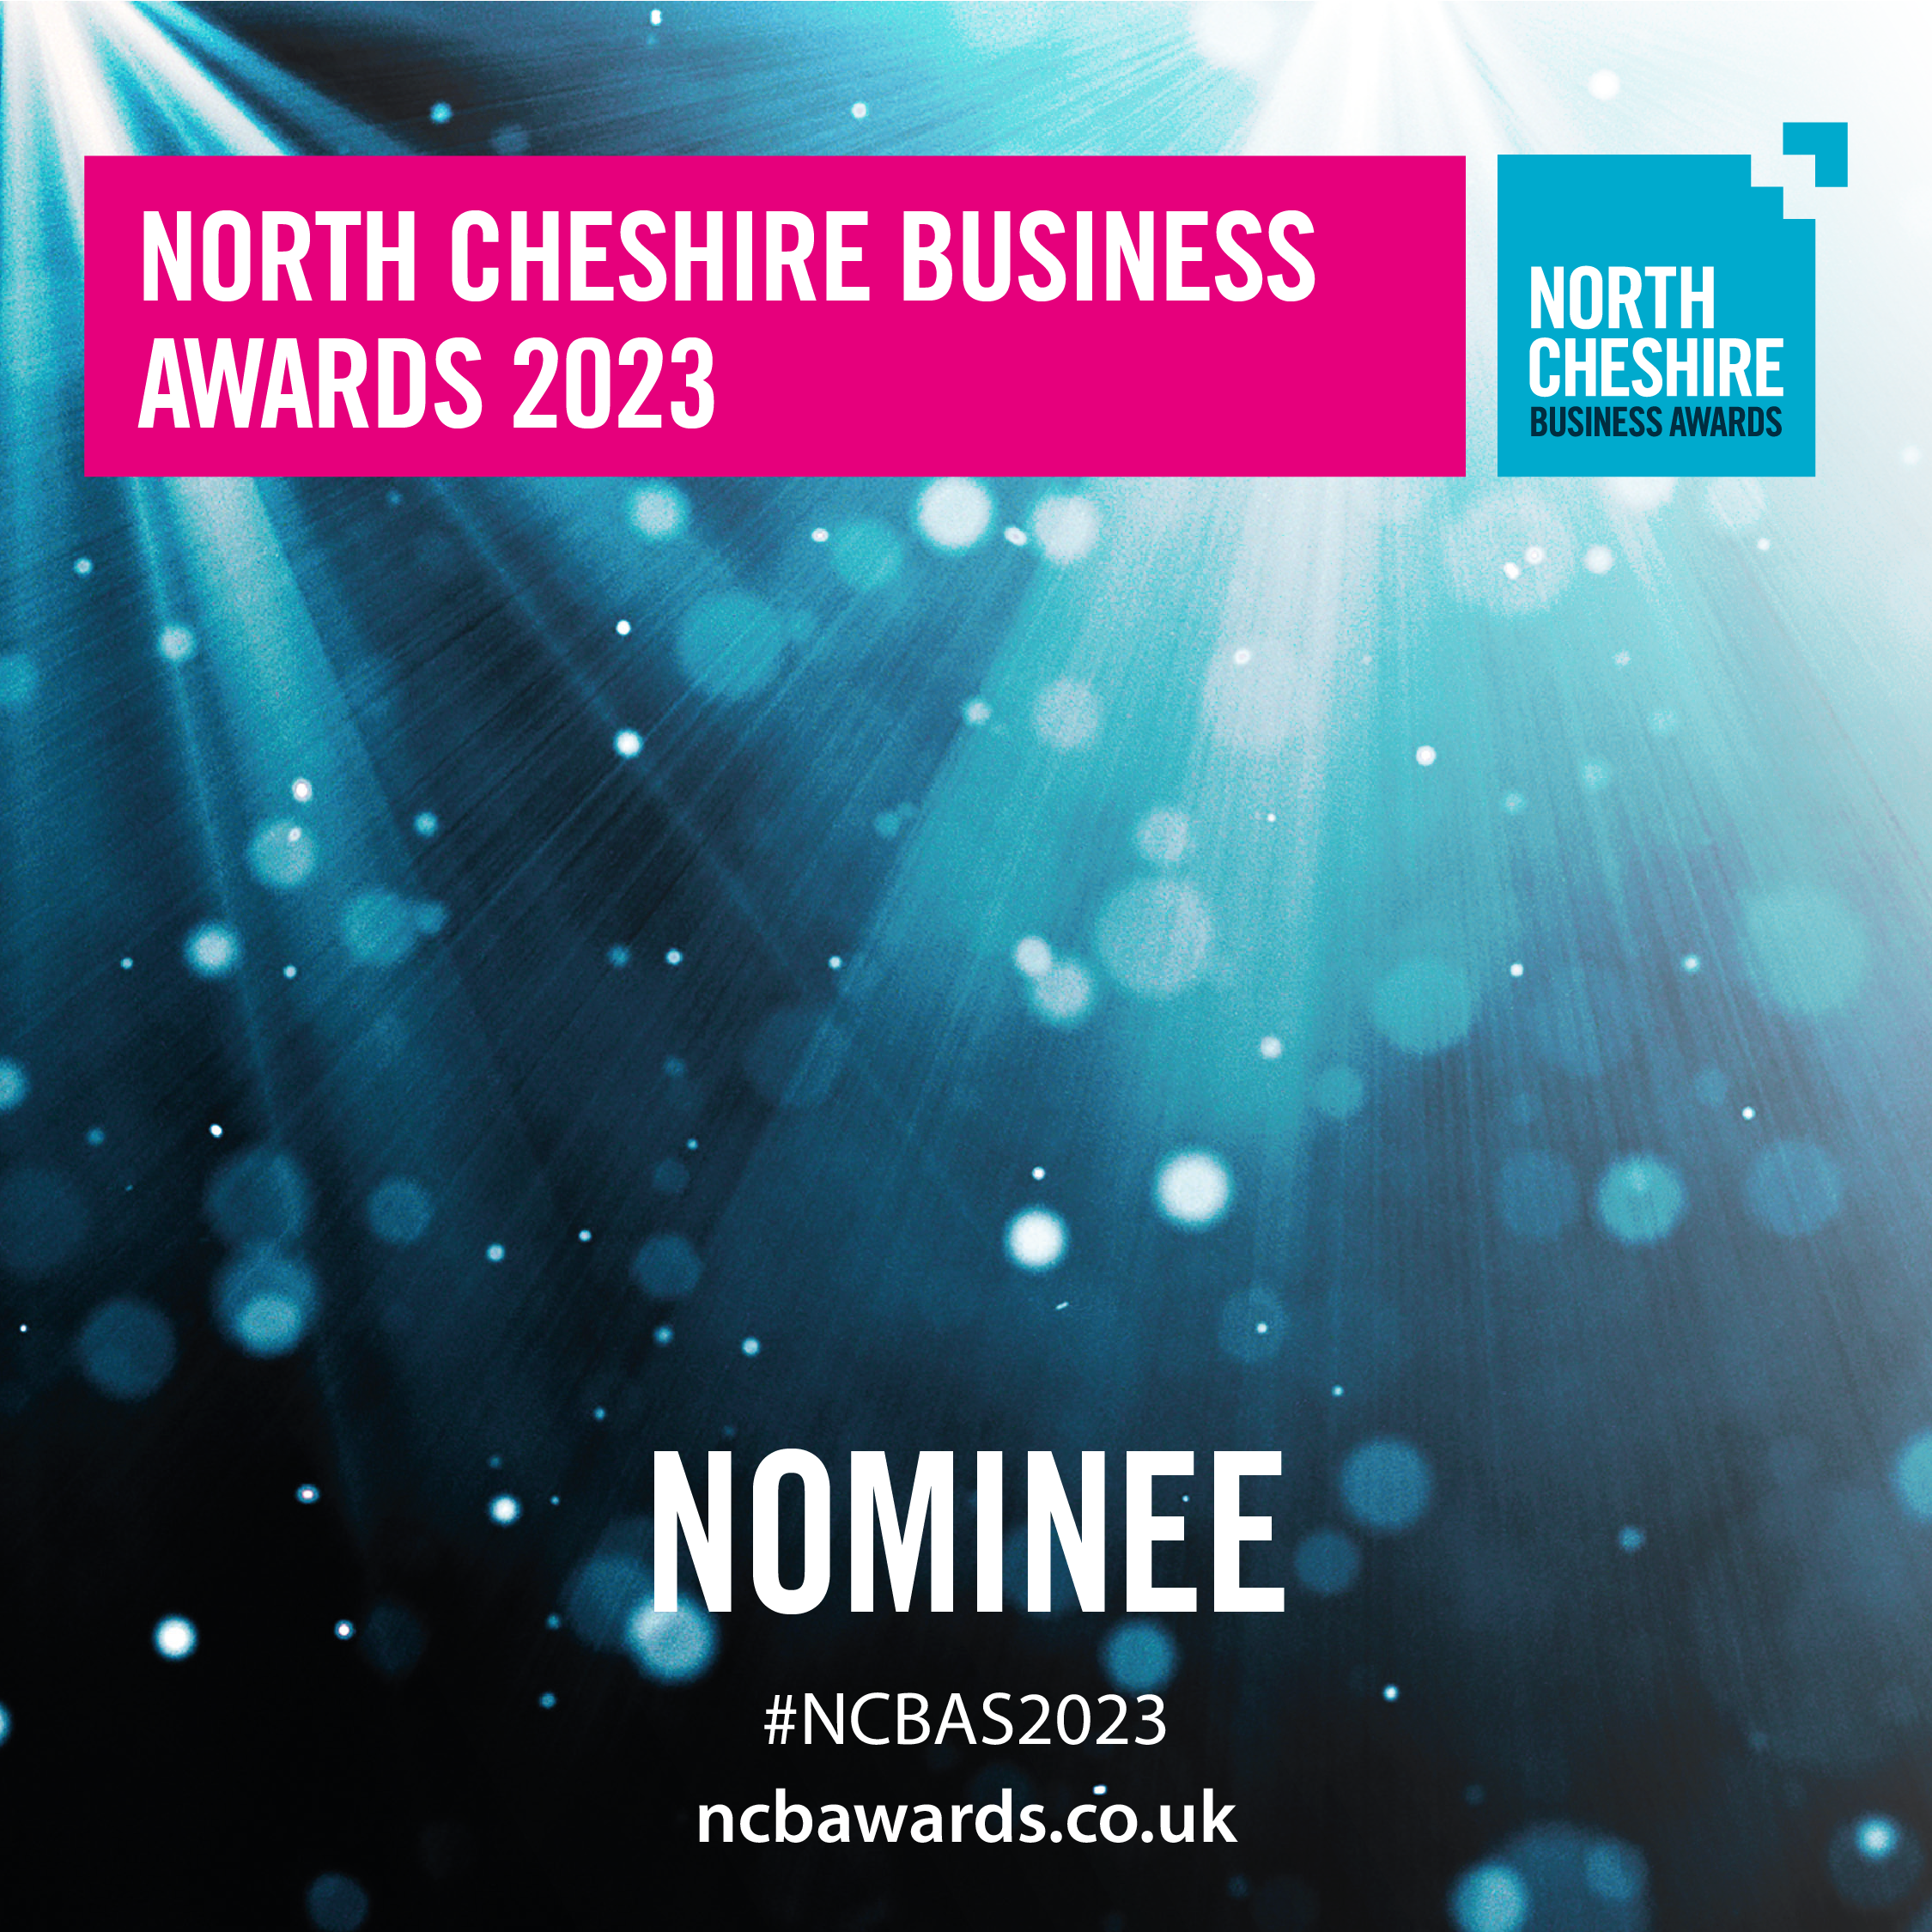 East Cheshire Hospice has been short-listed in four categories at the North Cheshire Business Awards